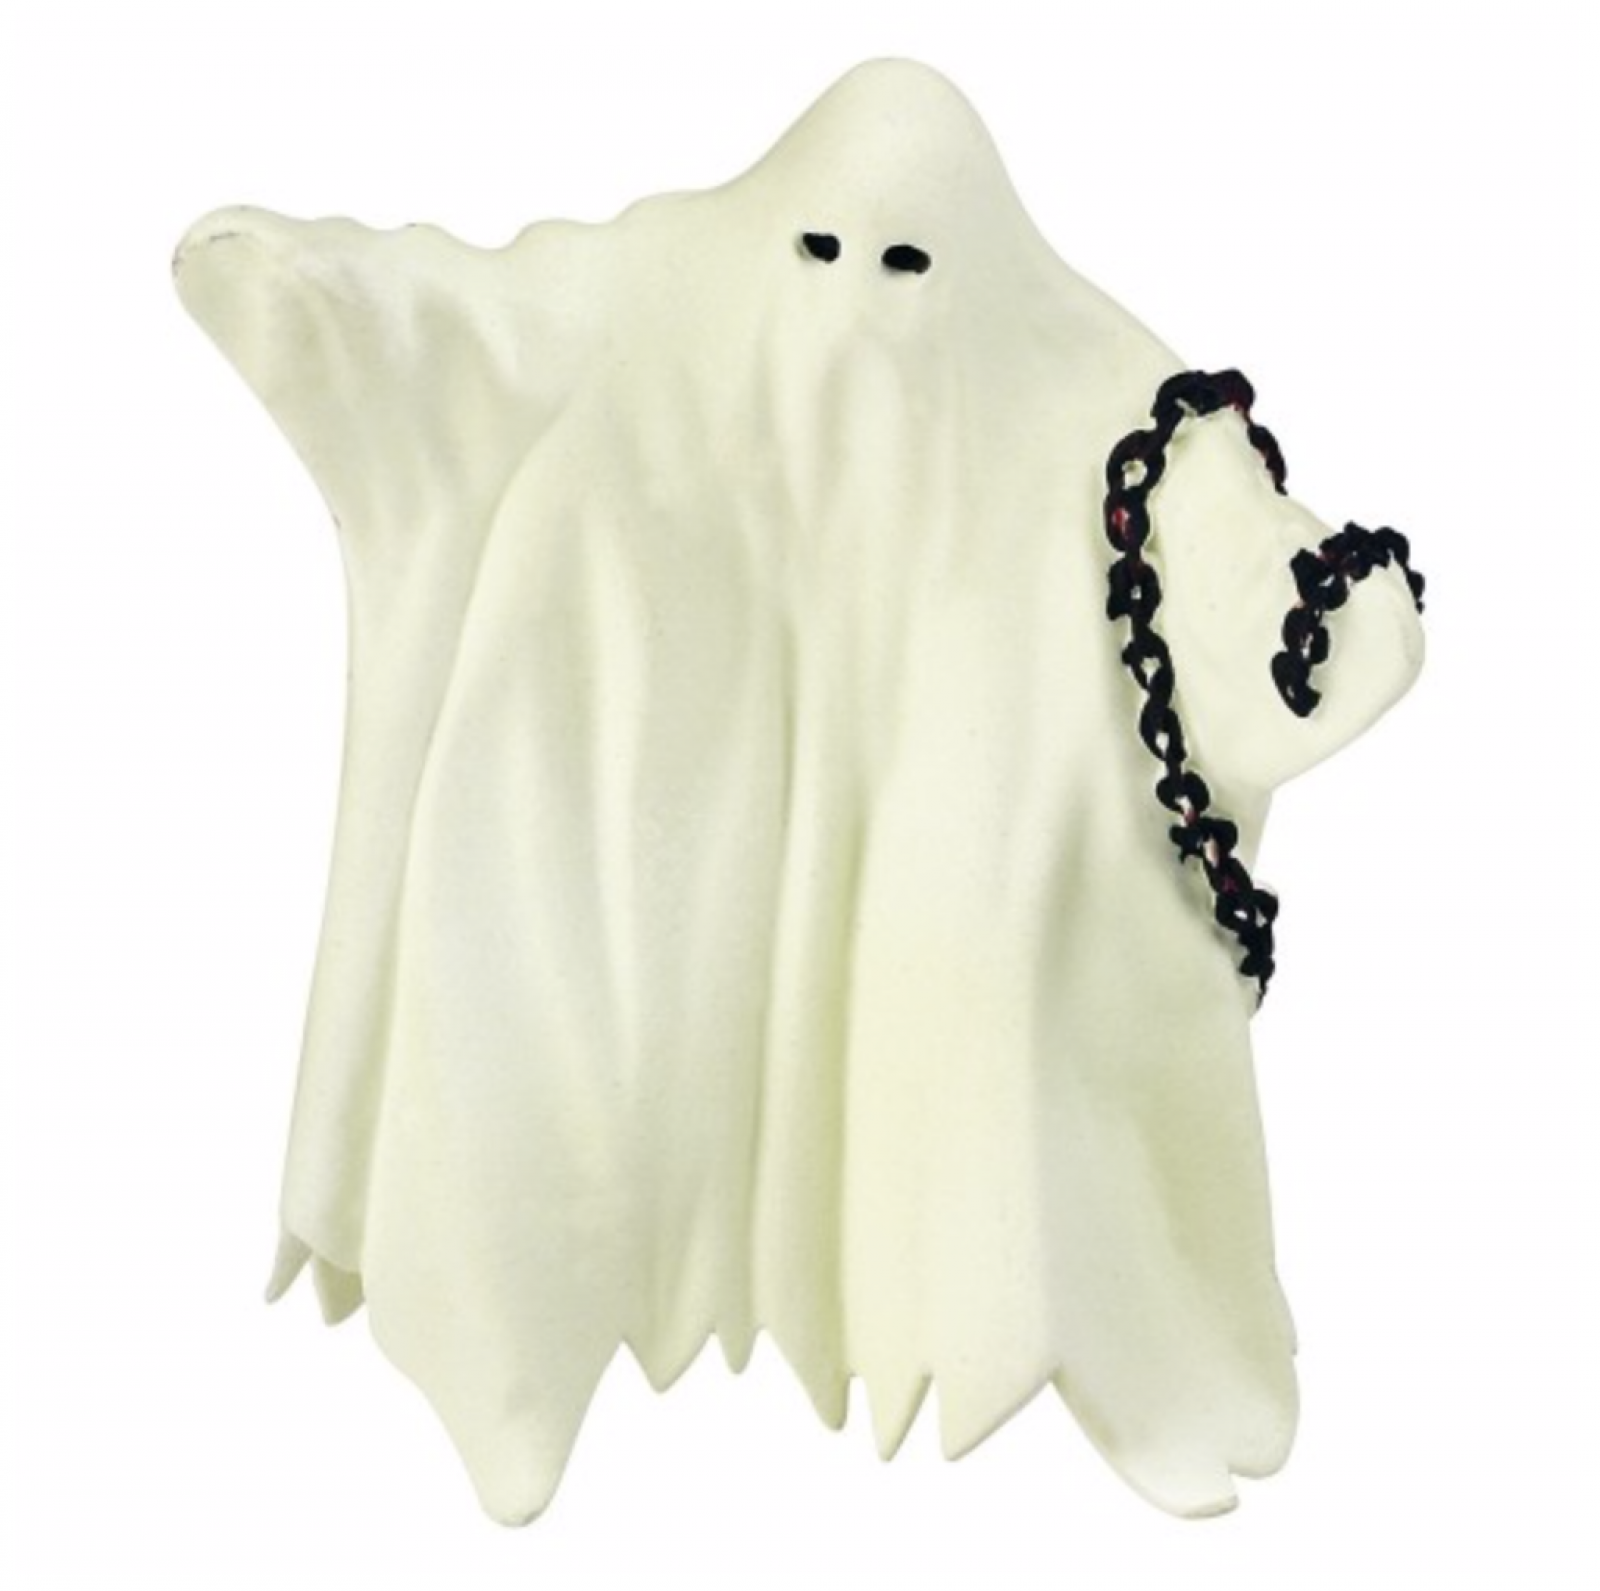 Glow In The Dark Ghost - Papo Fantasy Figure thumbnails